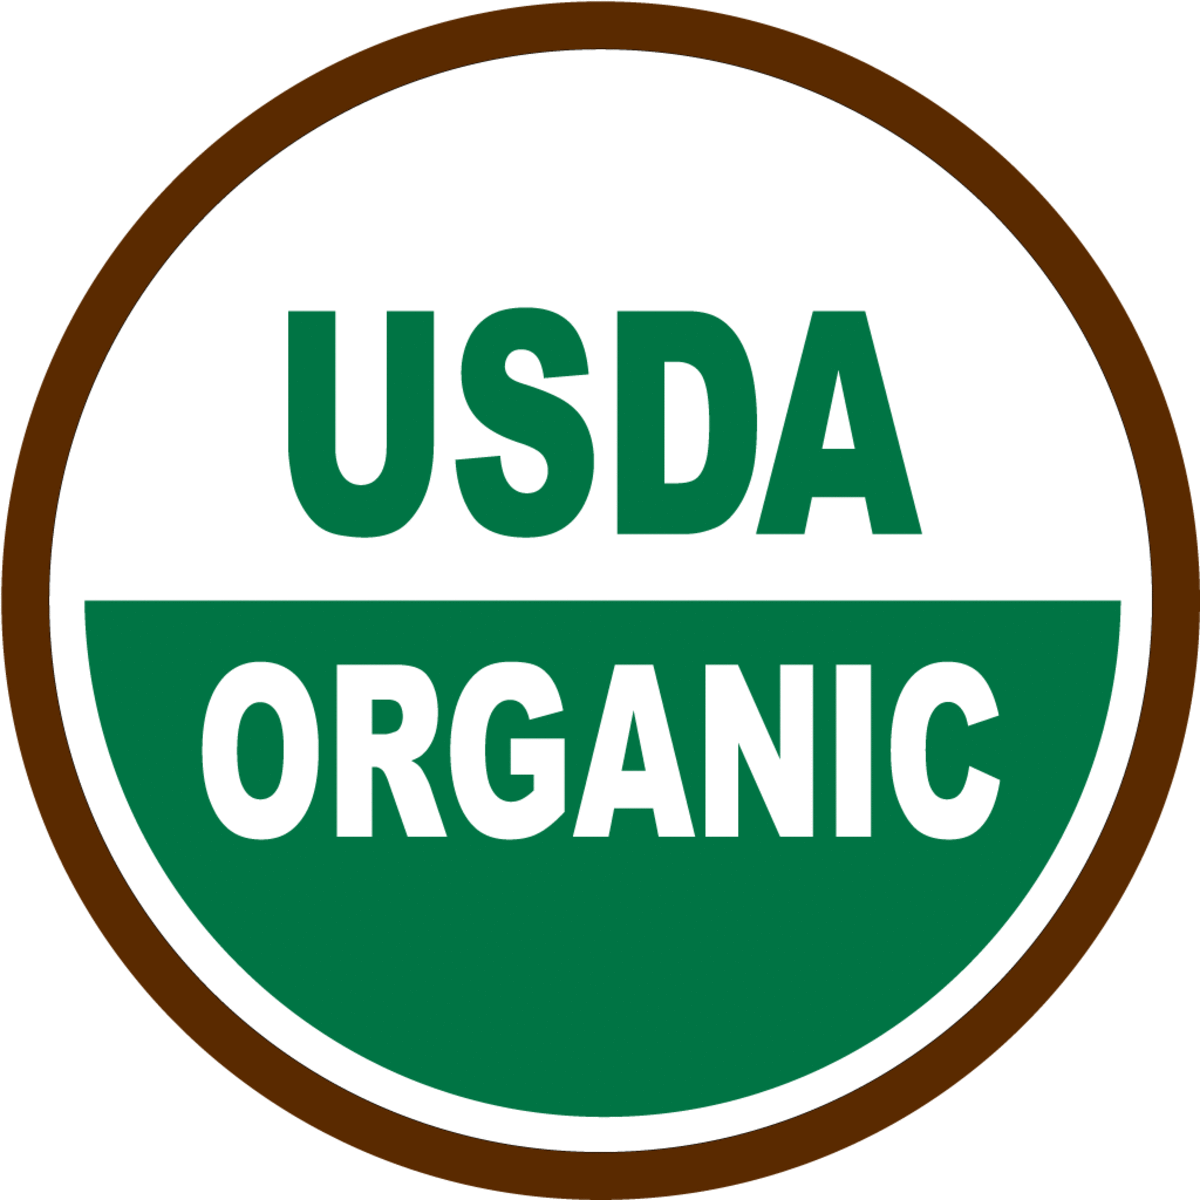 Organic food will be labeled with a USDA Organic Seal.